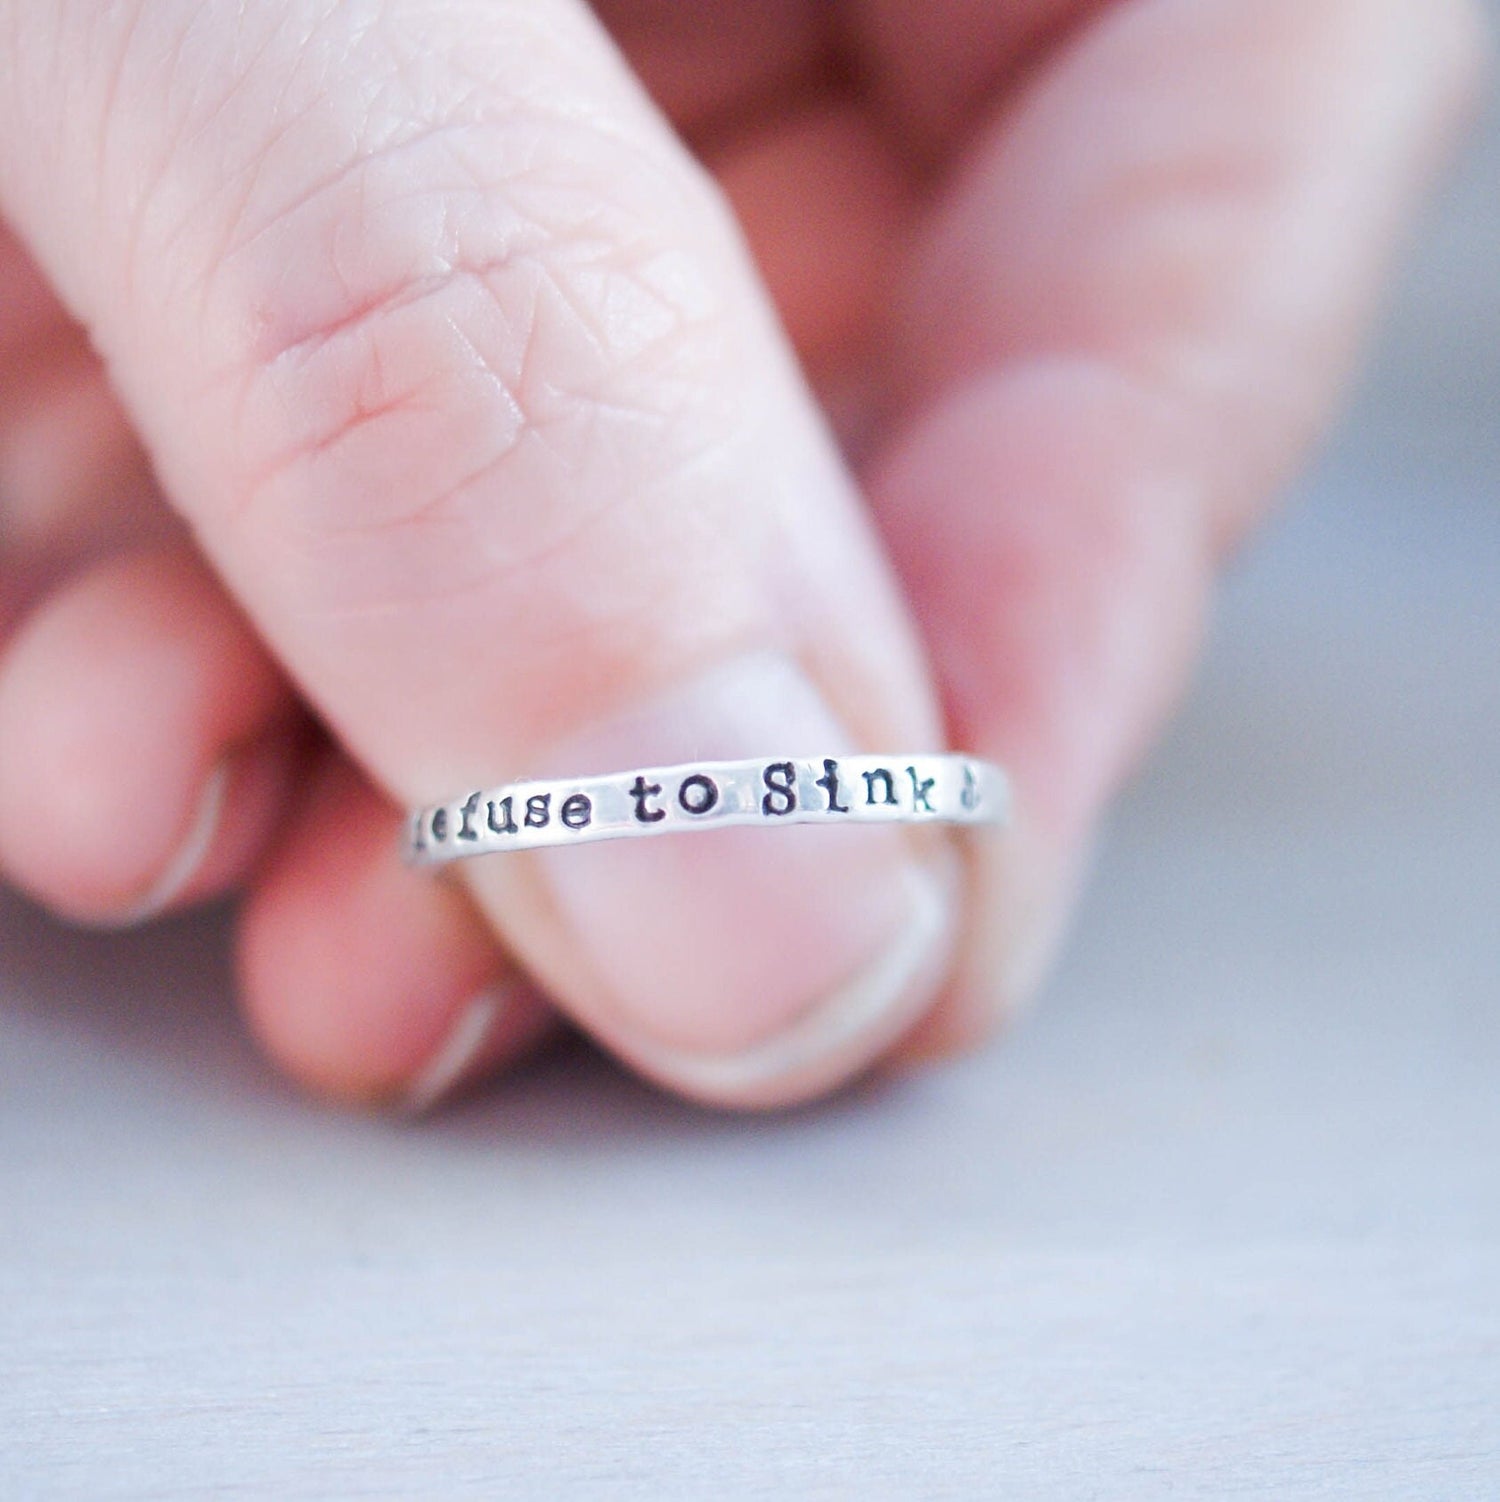 Sterling silver ring handstamped with Refuse to sink on thumb